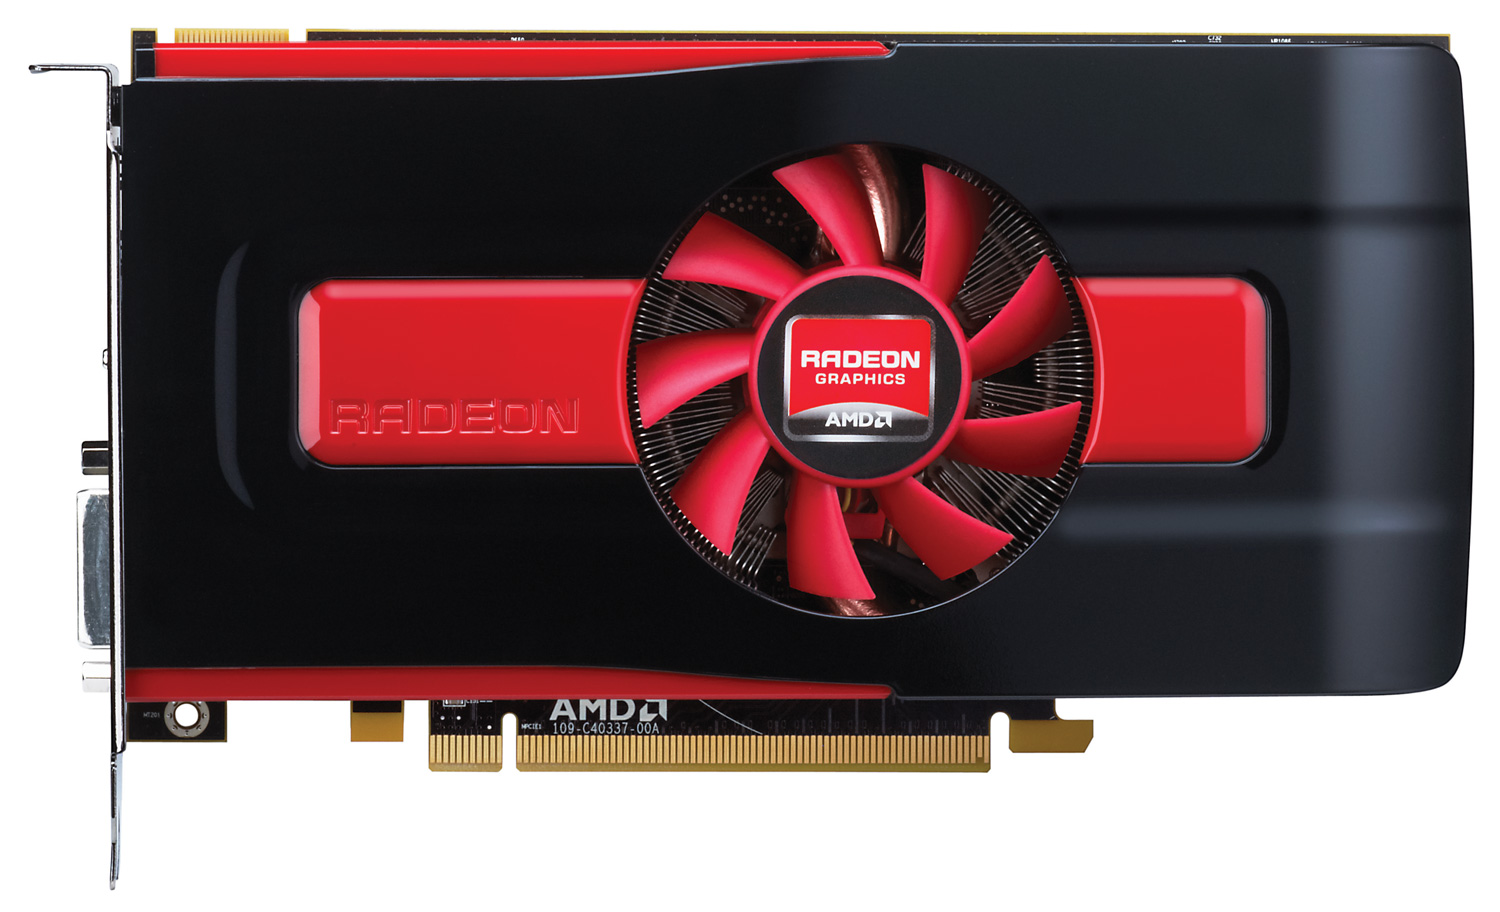 Amd Radeon Hd 7870 Meet The Radeon HD 7870 & Radeon HD 7850 - AMD Radeon HD 7870 GHz Edition & Radeon  HD 7850 Review: Rounding Out Southern Islands